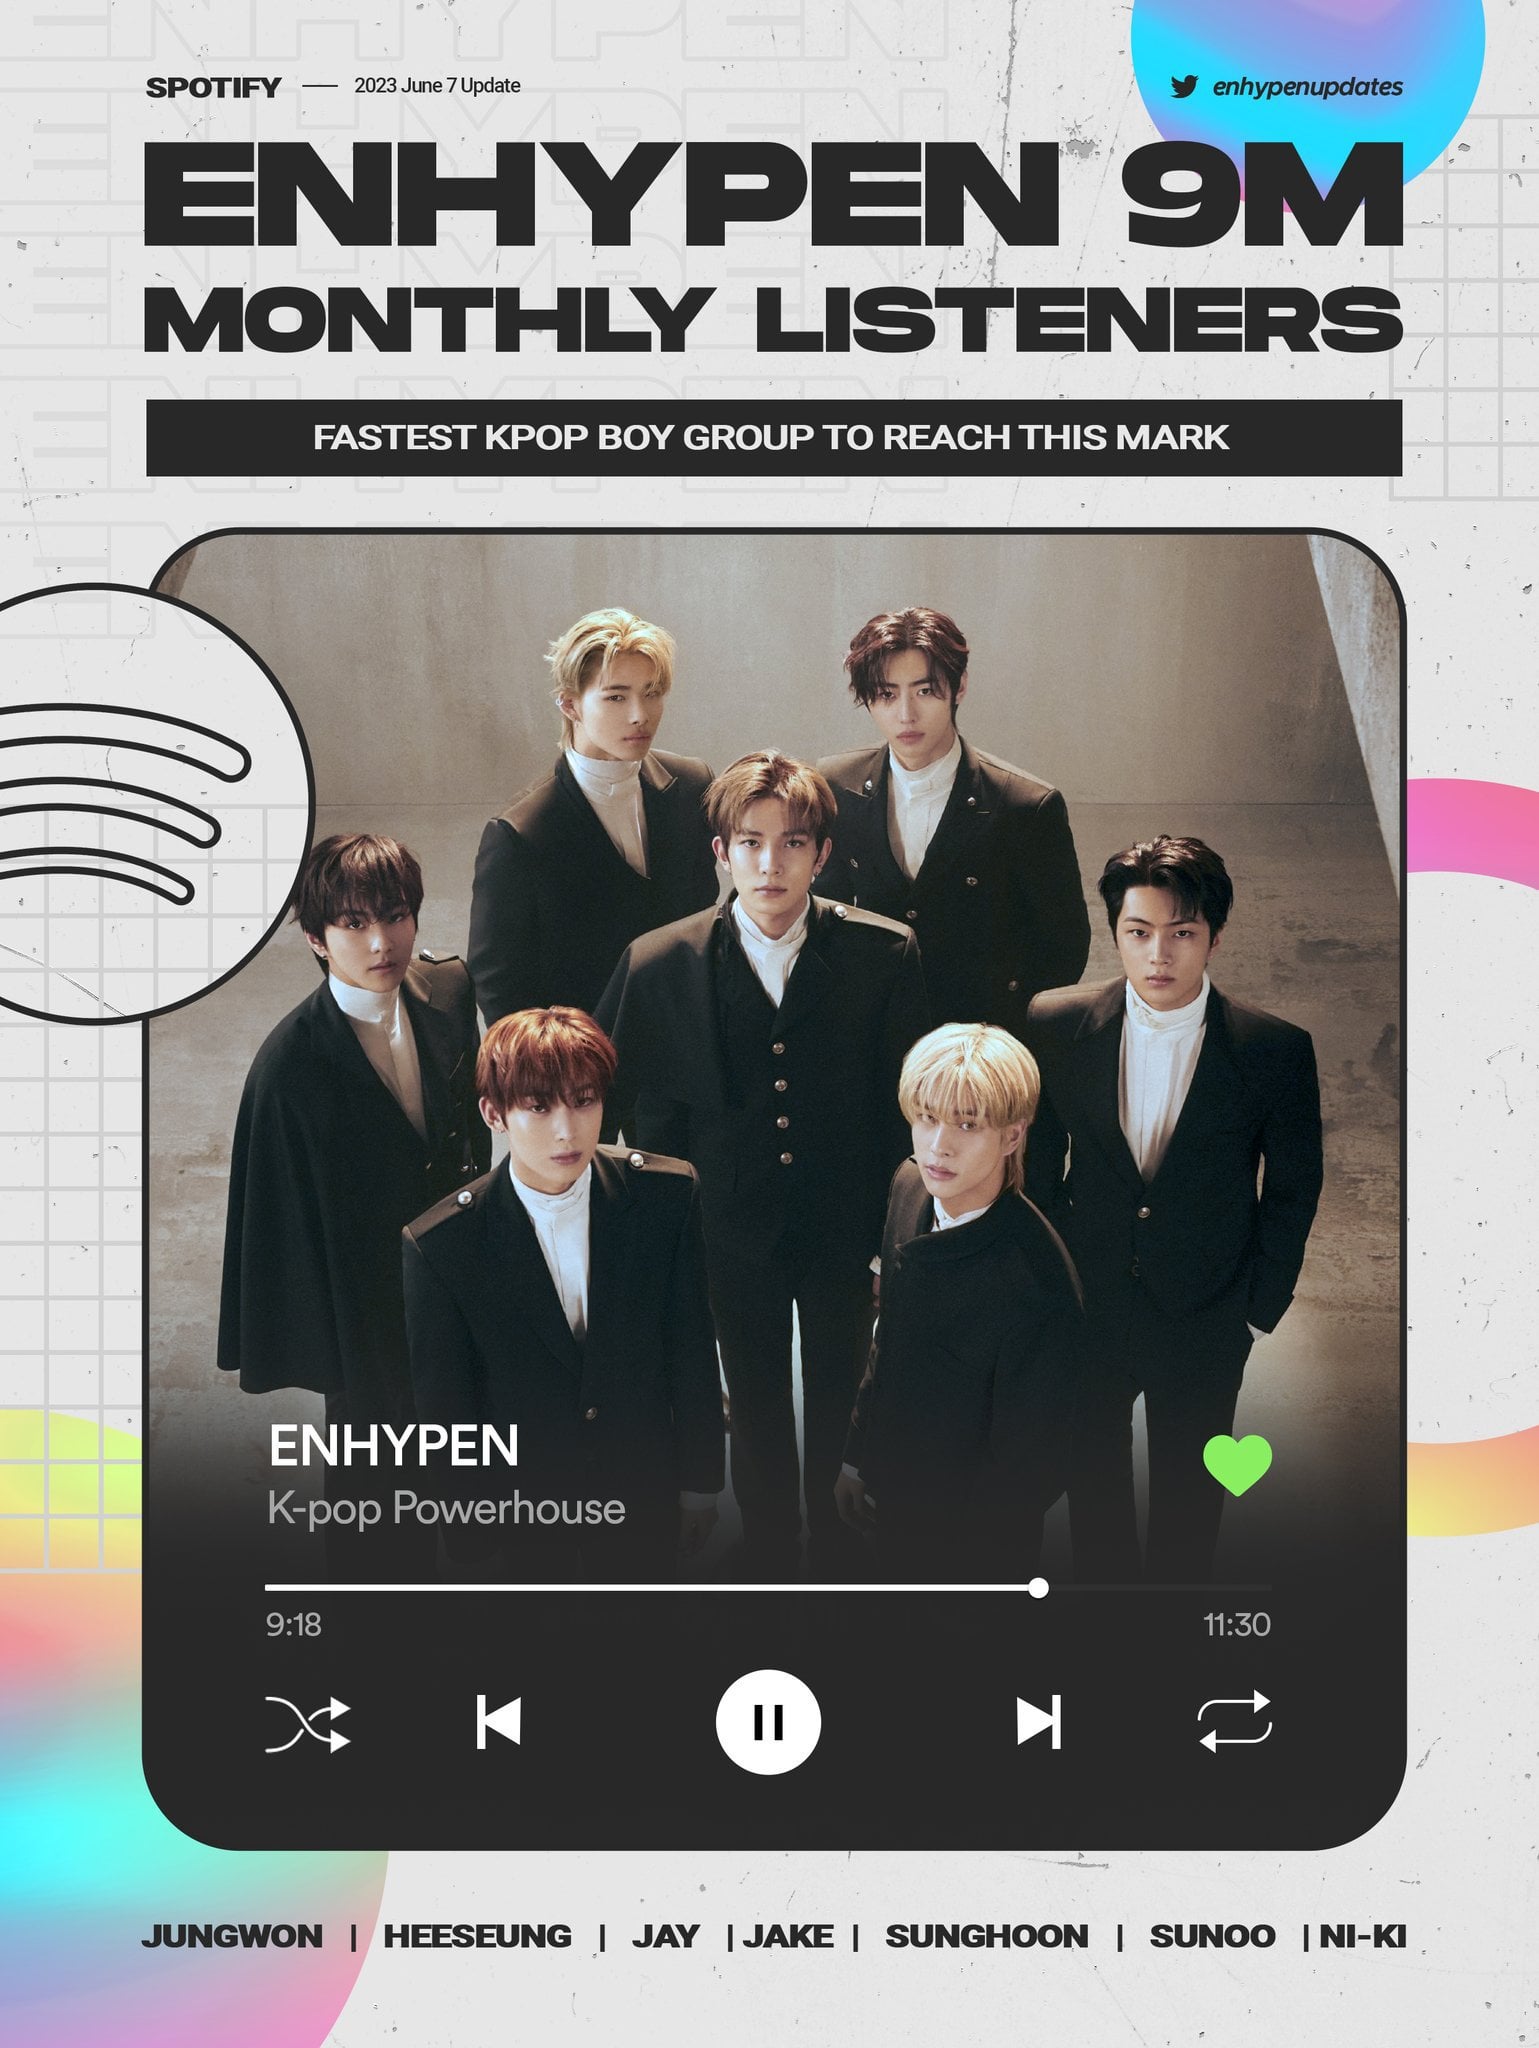 230609 ENHYPEN has surpassed 9 MILLION monthly listeners on Spotify, their new career peak! They join BTS, TXT, and SEVENTEEN as the only K-Pop Boy Groups to reach this mark. They are the FASTEST K-Pop Boy Group to surpass 9M (920 days) 🎉